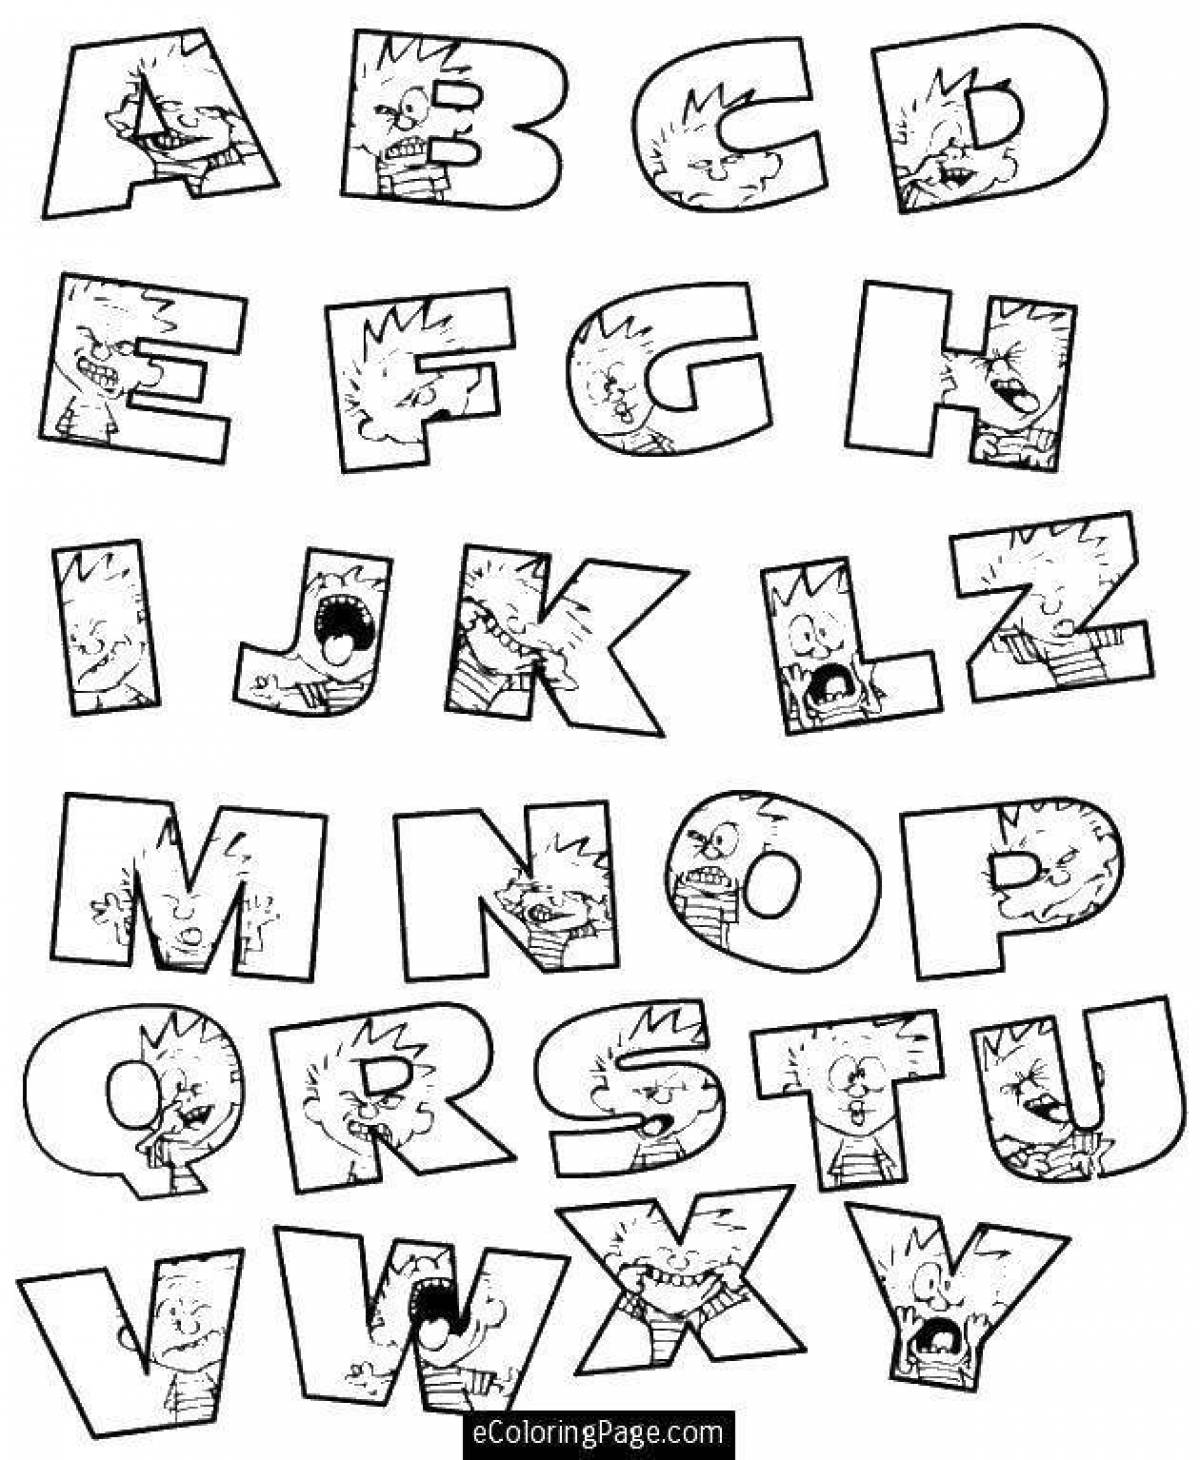 Colorful english alphabet coloring page for kids of all cultures